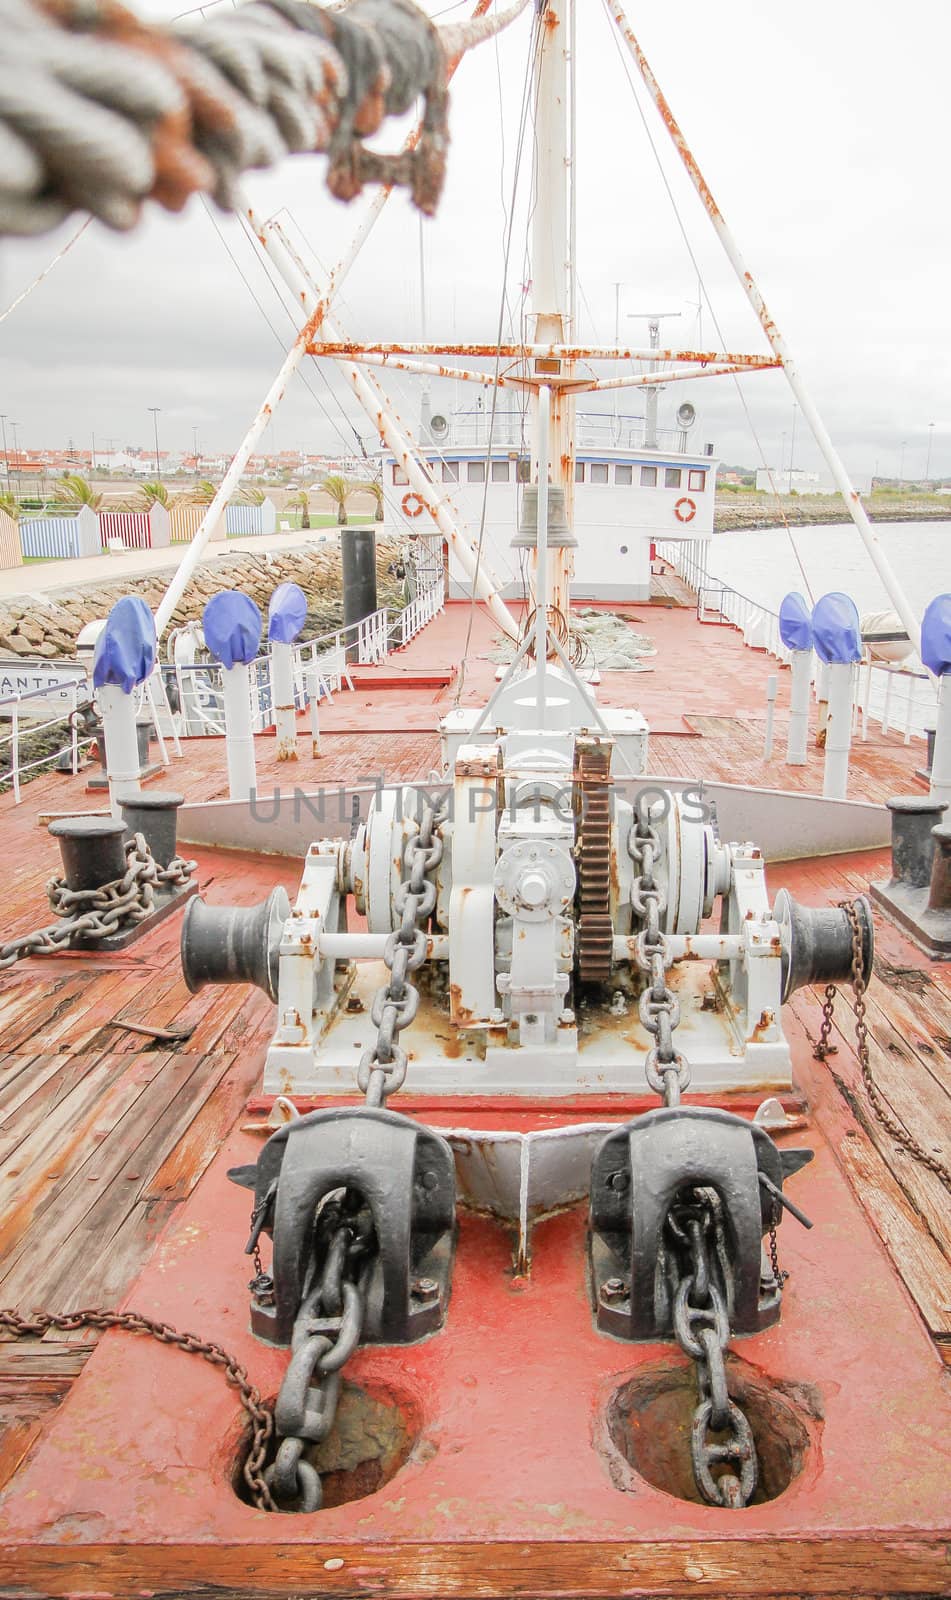 View of ship deck with engine anchors and chains